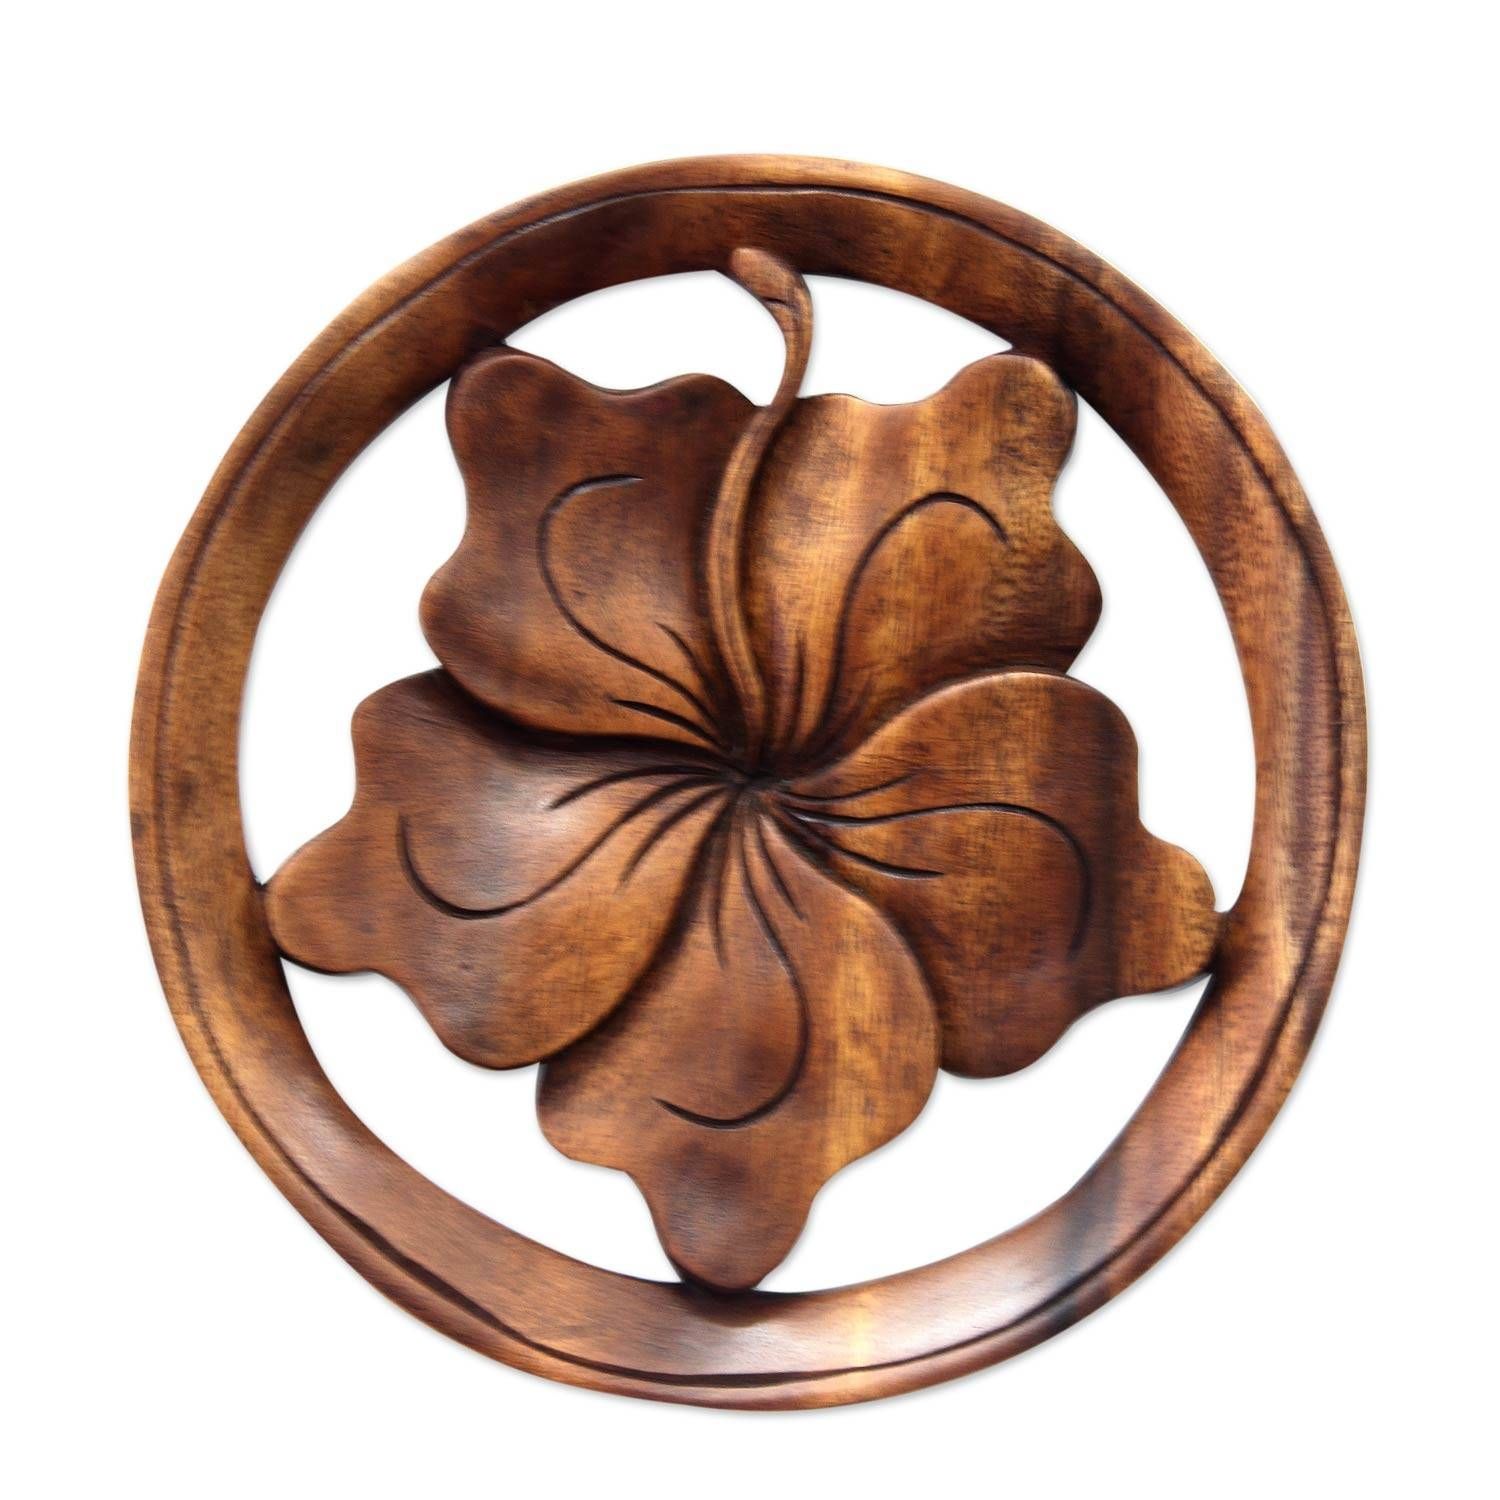 Balinese Wood Wall Art At Novica For Most Up To Date Balinese Wall Art (Gallery 25 of 30)